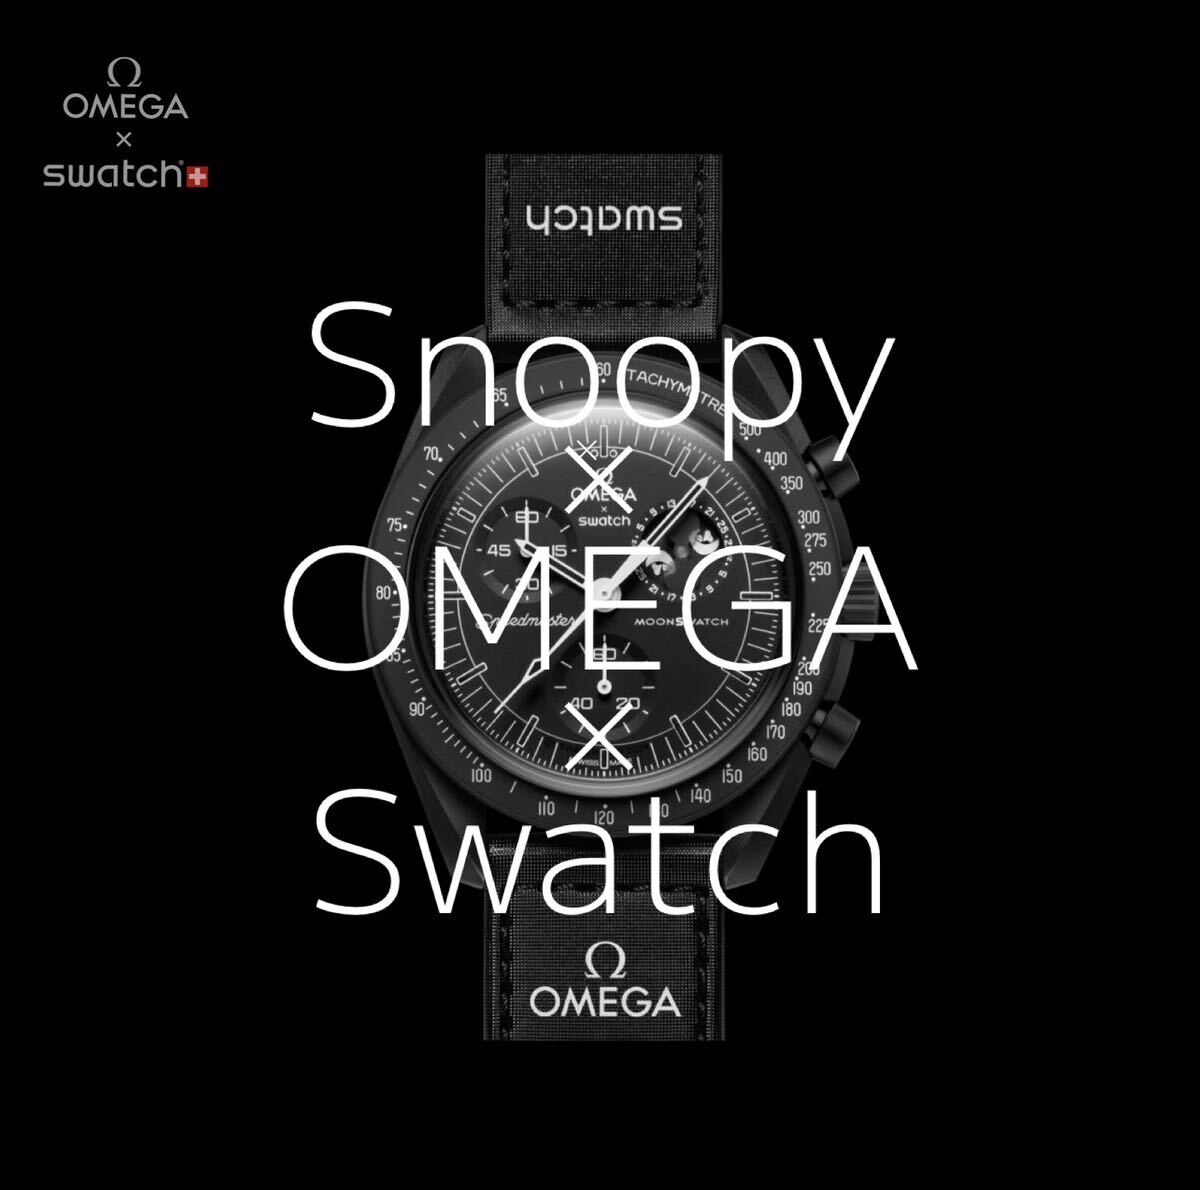 Snoopy joins MISSION TO THE MOONPHASE OMEGA×Swatch BIOCERAMIC MoonSwatch “NEW MOON”の画像1